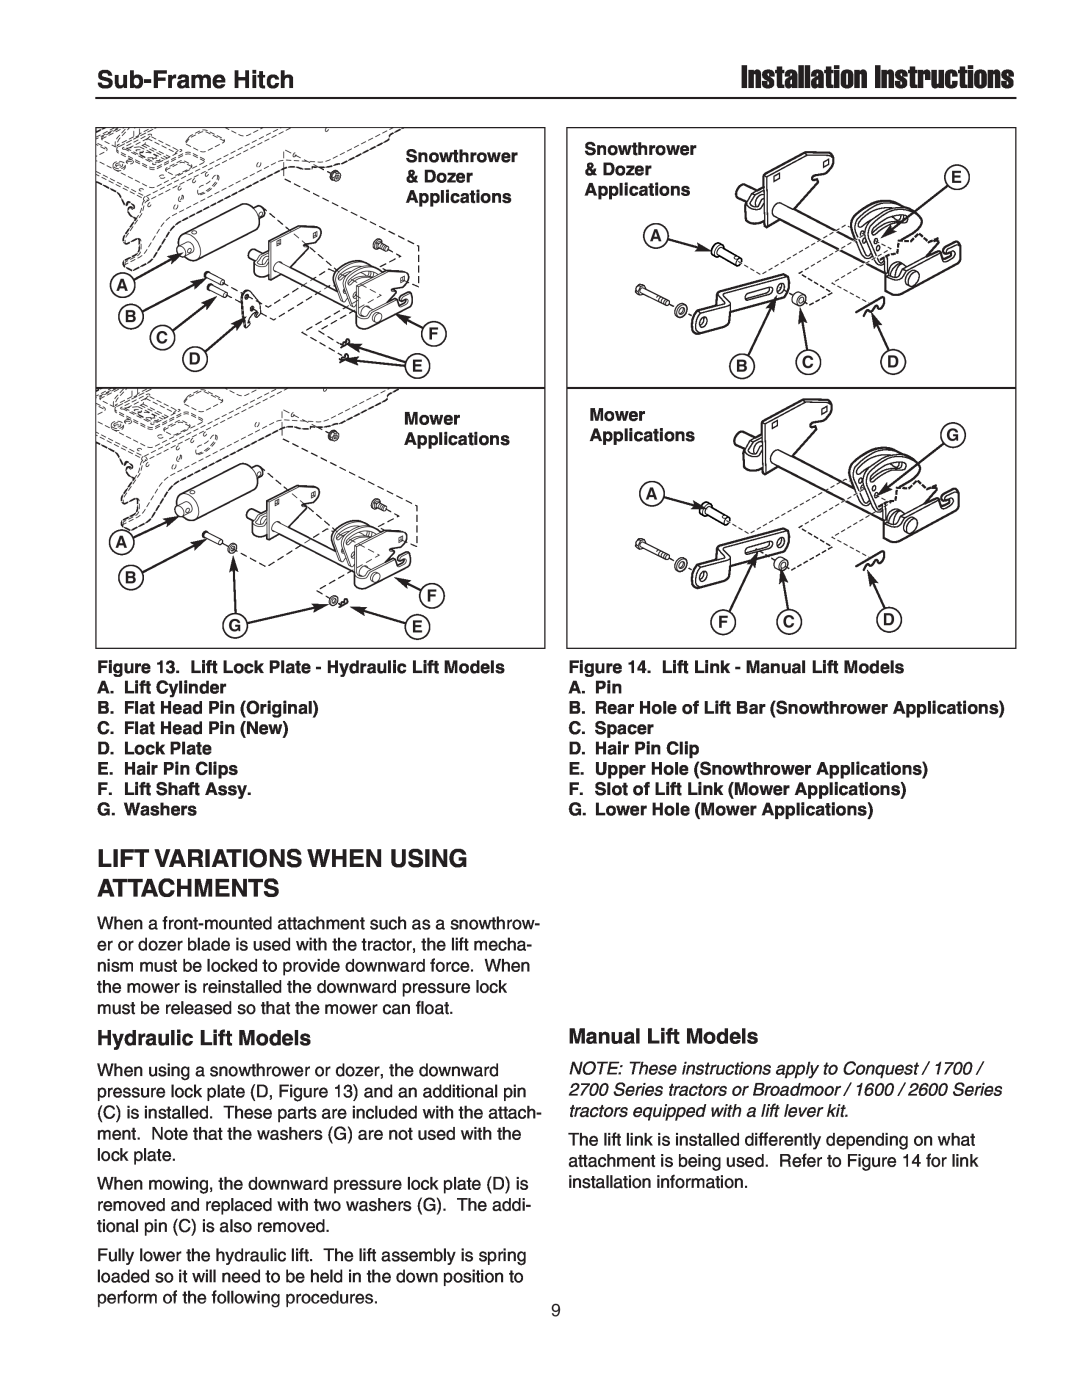 Briggs & Stratton 1695195 Lift Variations When Using Attachments, Installation Instructions, Sub-Frame Hitch, Snowthrower 